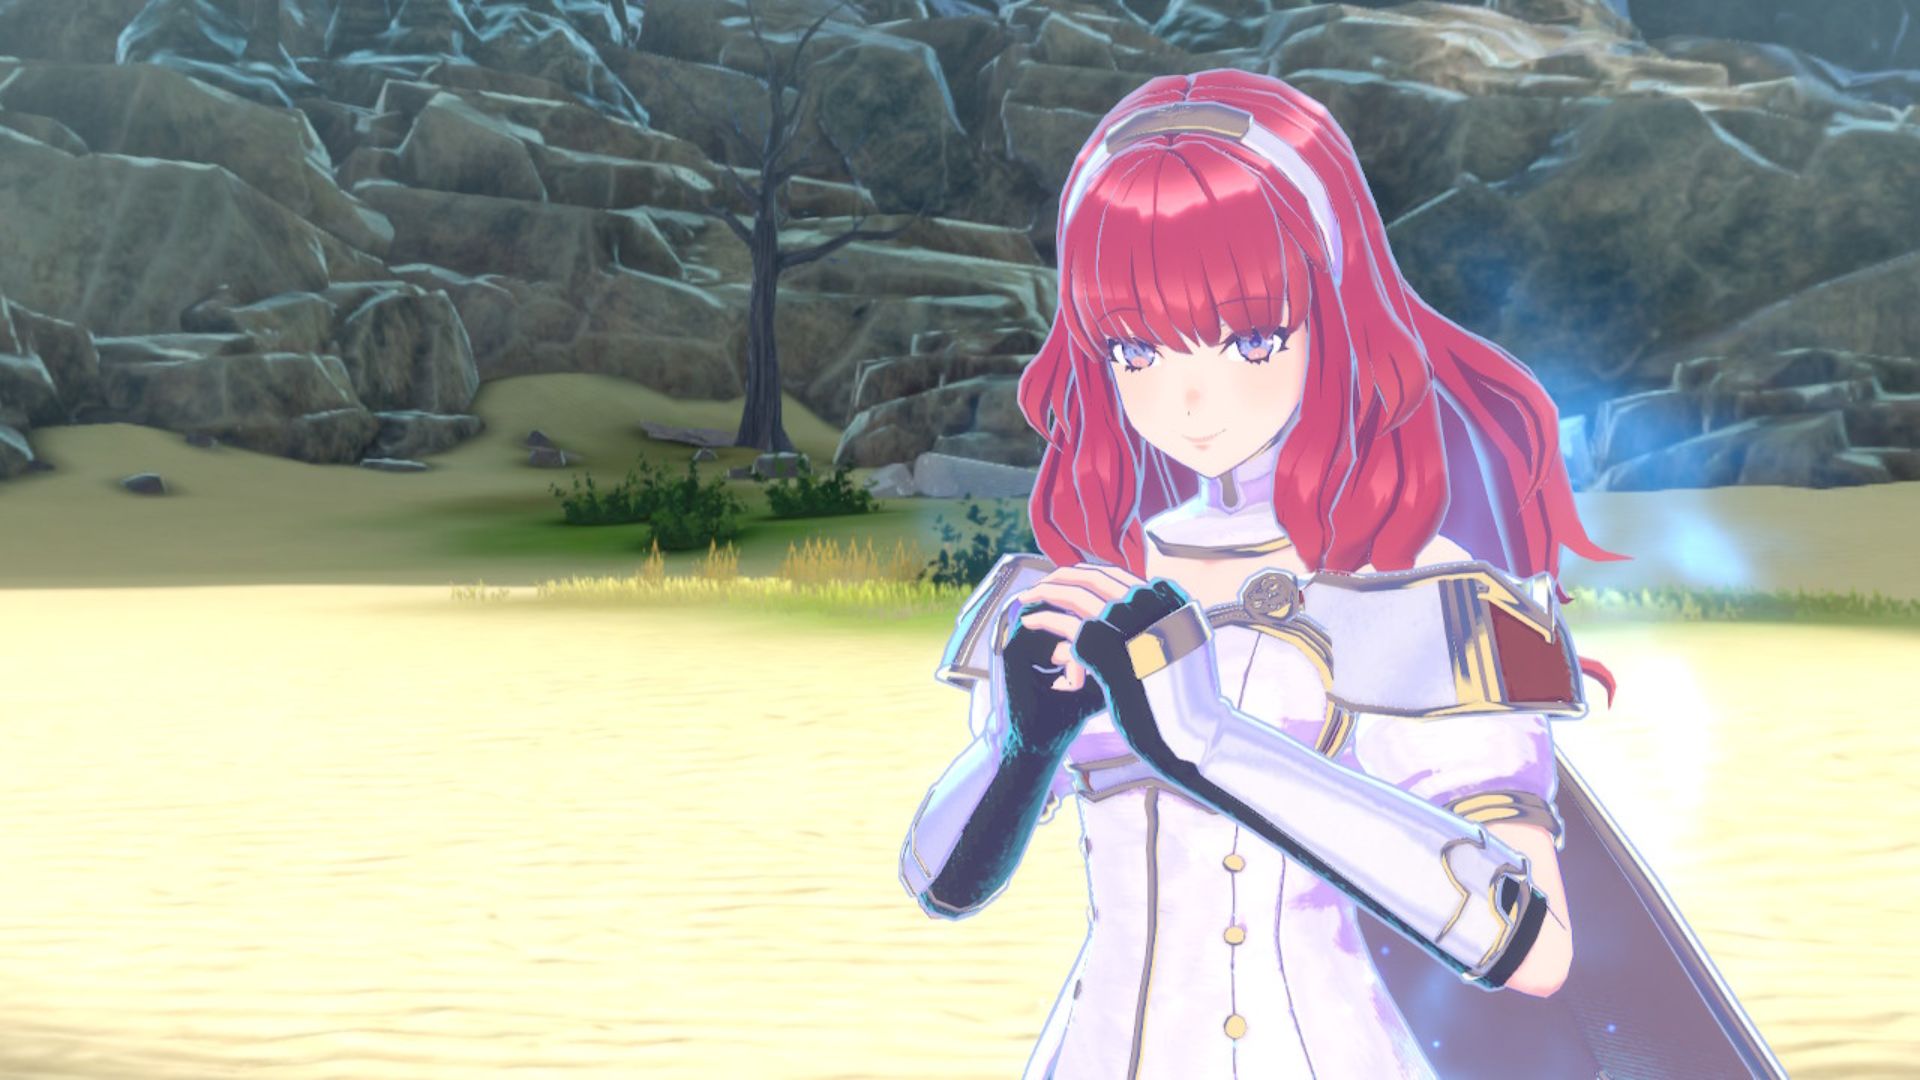 Fire Emblem Engage Paralogues: The character can be seen